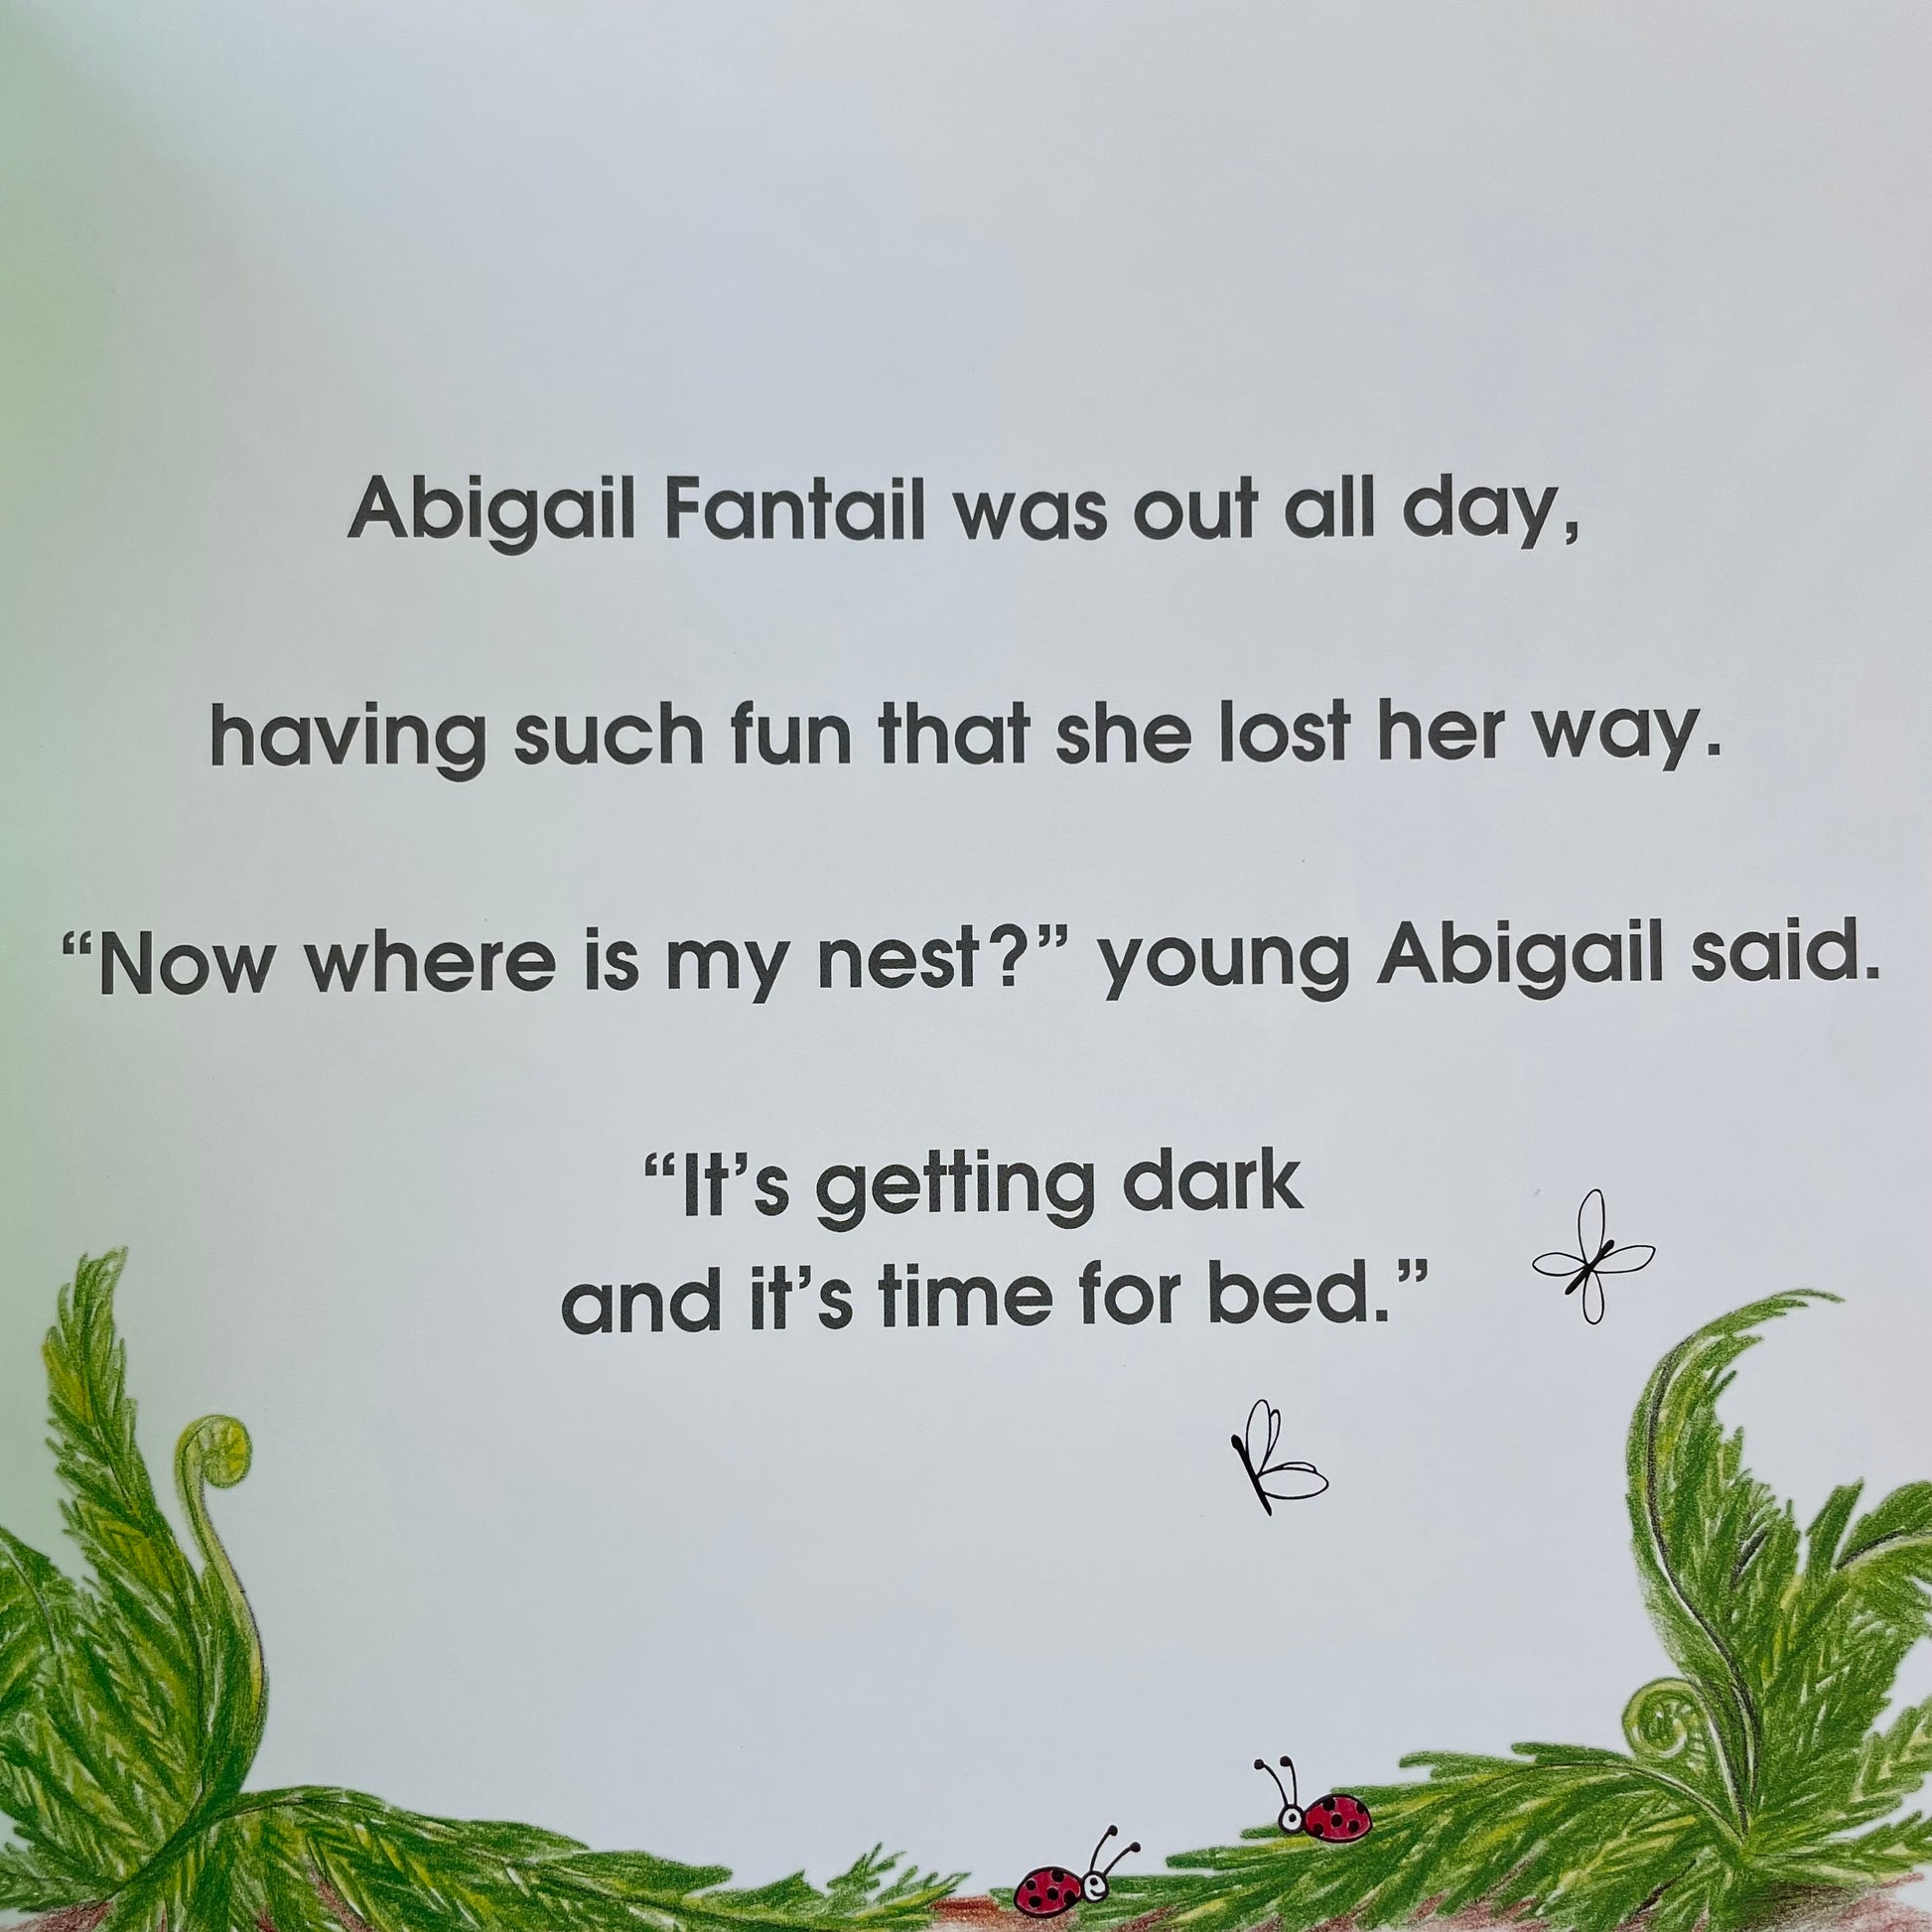 Inside pages of Abigail Fantail showing text from the story.